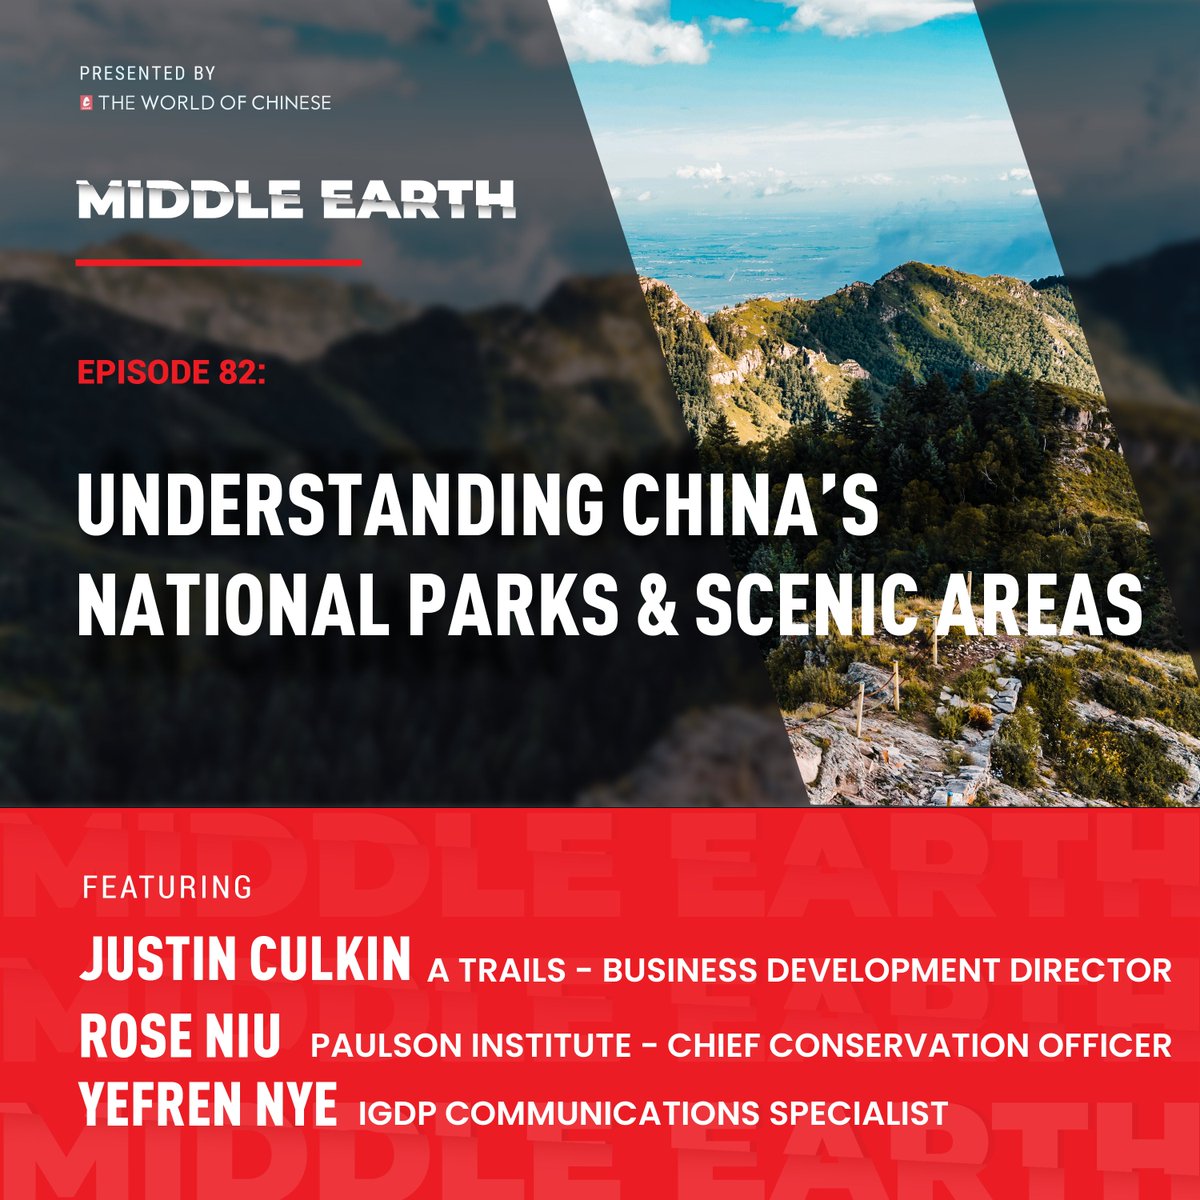 In 2021, over 2 billion visits were made to 🇨🇳’s outdoor sites. On #MiddleEarthPodcast with Justin Culkin, Rose Niu (@PaulsonInst) & Yefren Nye we talk about this part of the tourism industry & 🇨🇳 new national parks. 🎧 theworldofchinese.com/the-world-of-c… Powered by @WorldofChinese